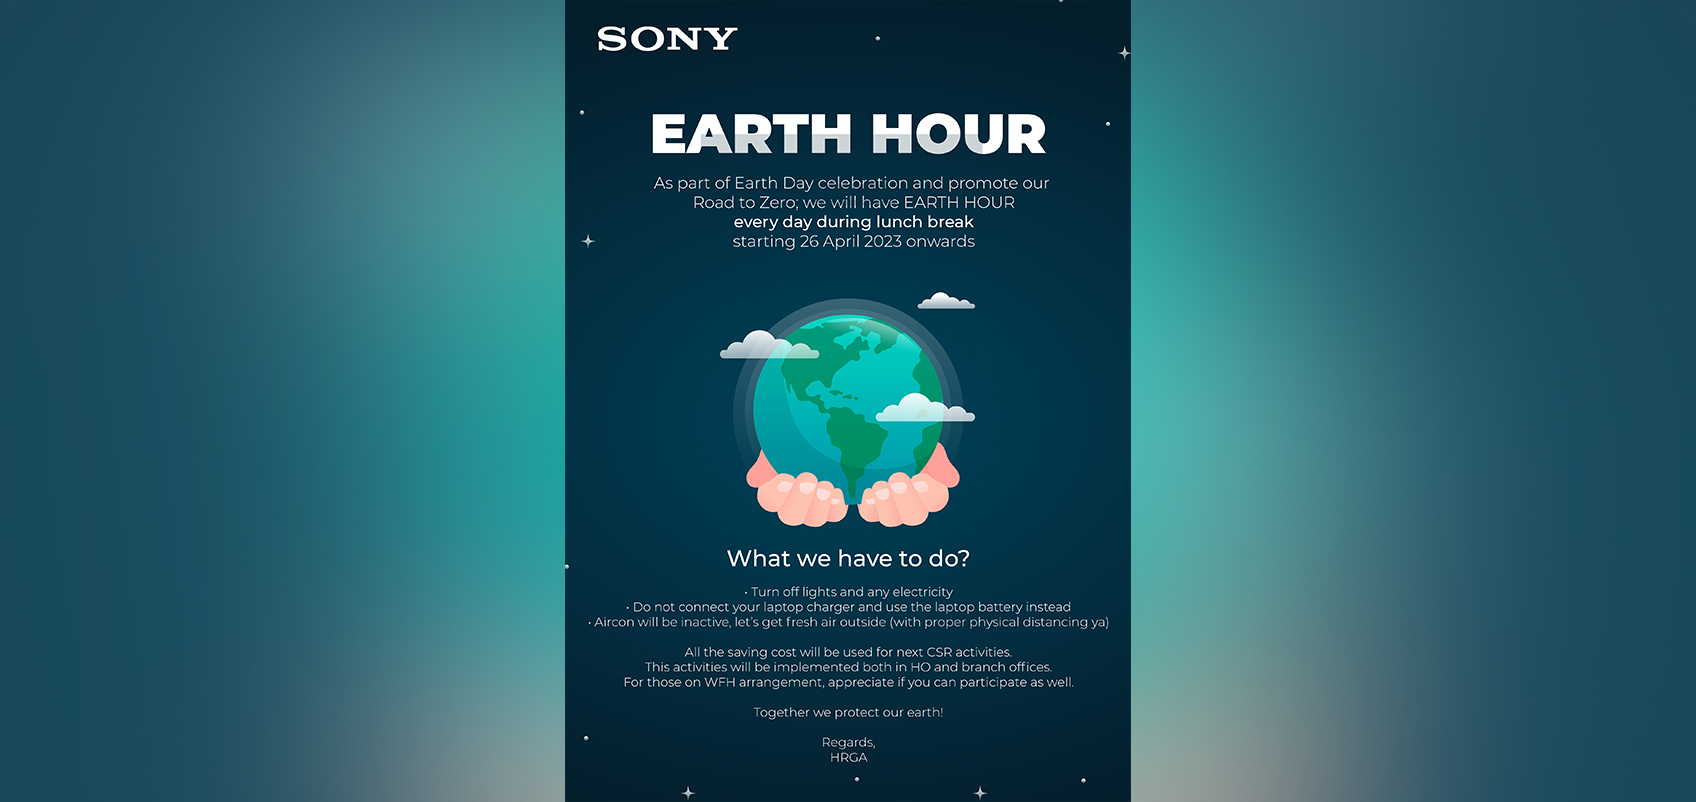 Illustration of the Earth Hour initiative, with both hands encircling the earth